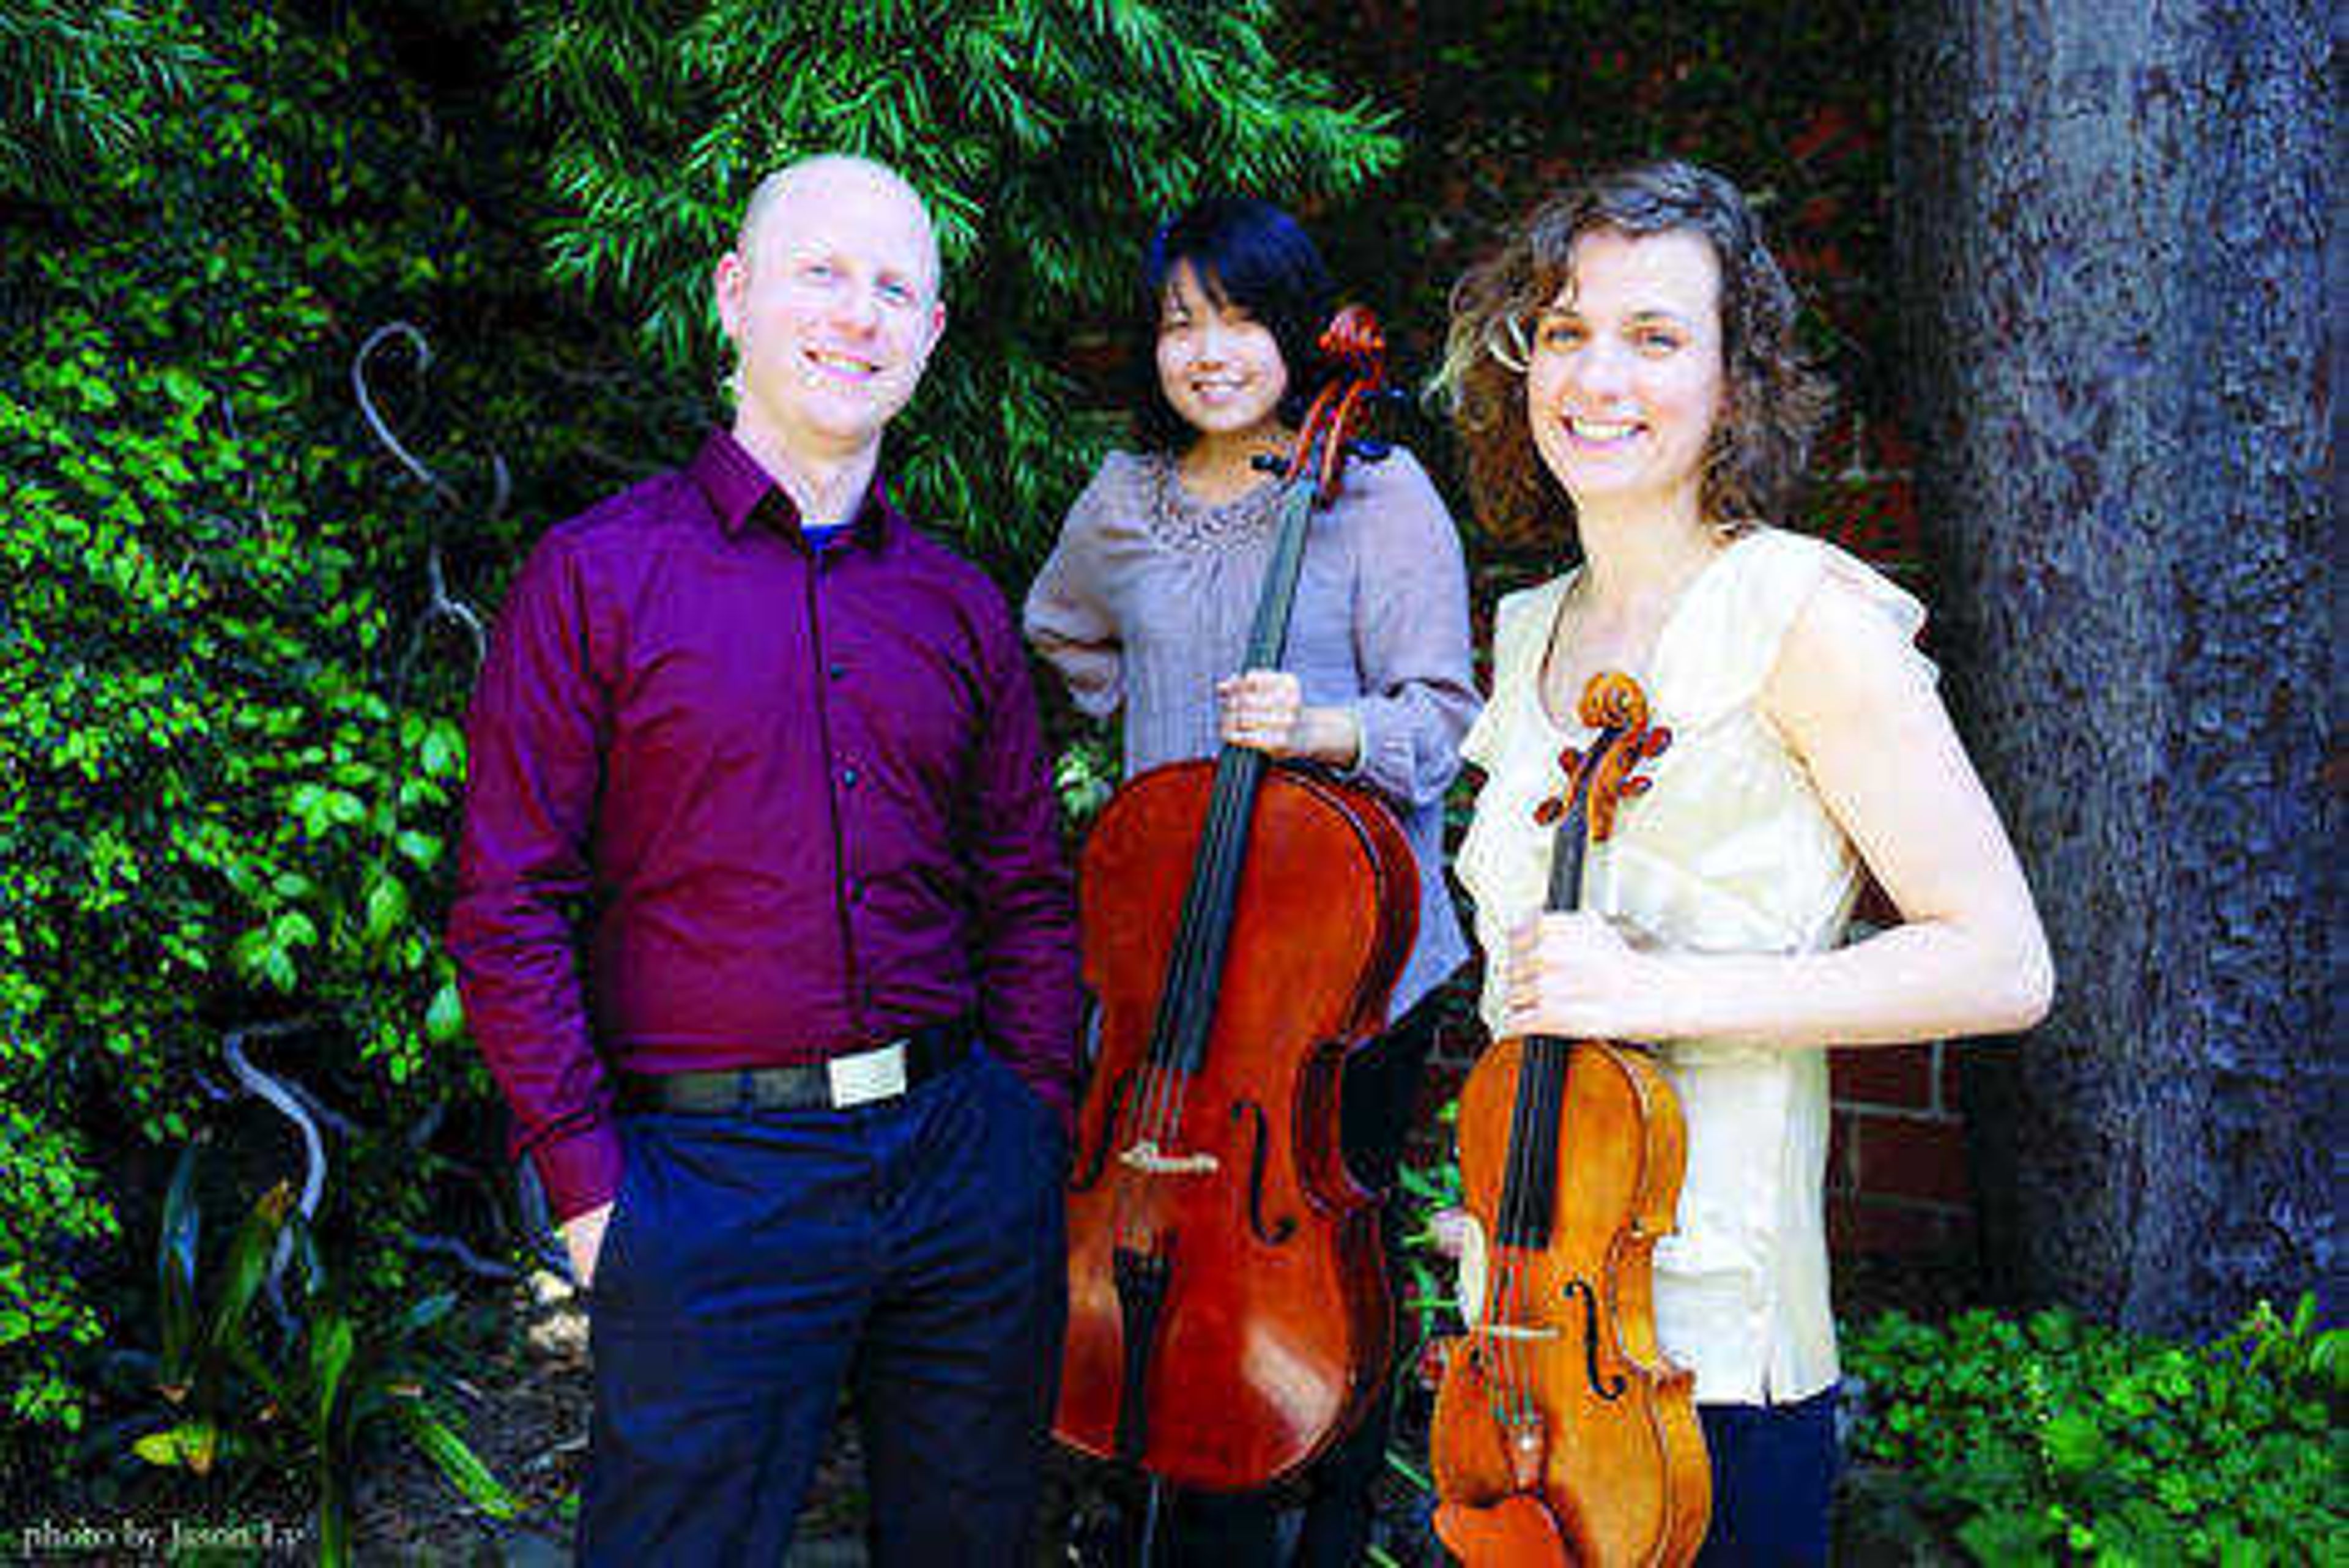 From left to right, pianist Jeff LaDeur, cellist Michelle Kwon and violinist Liana Bérubé make up the Delphi Trio. Submitted photo